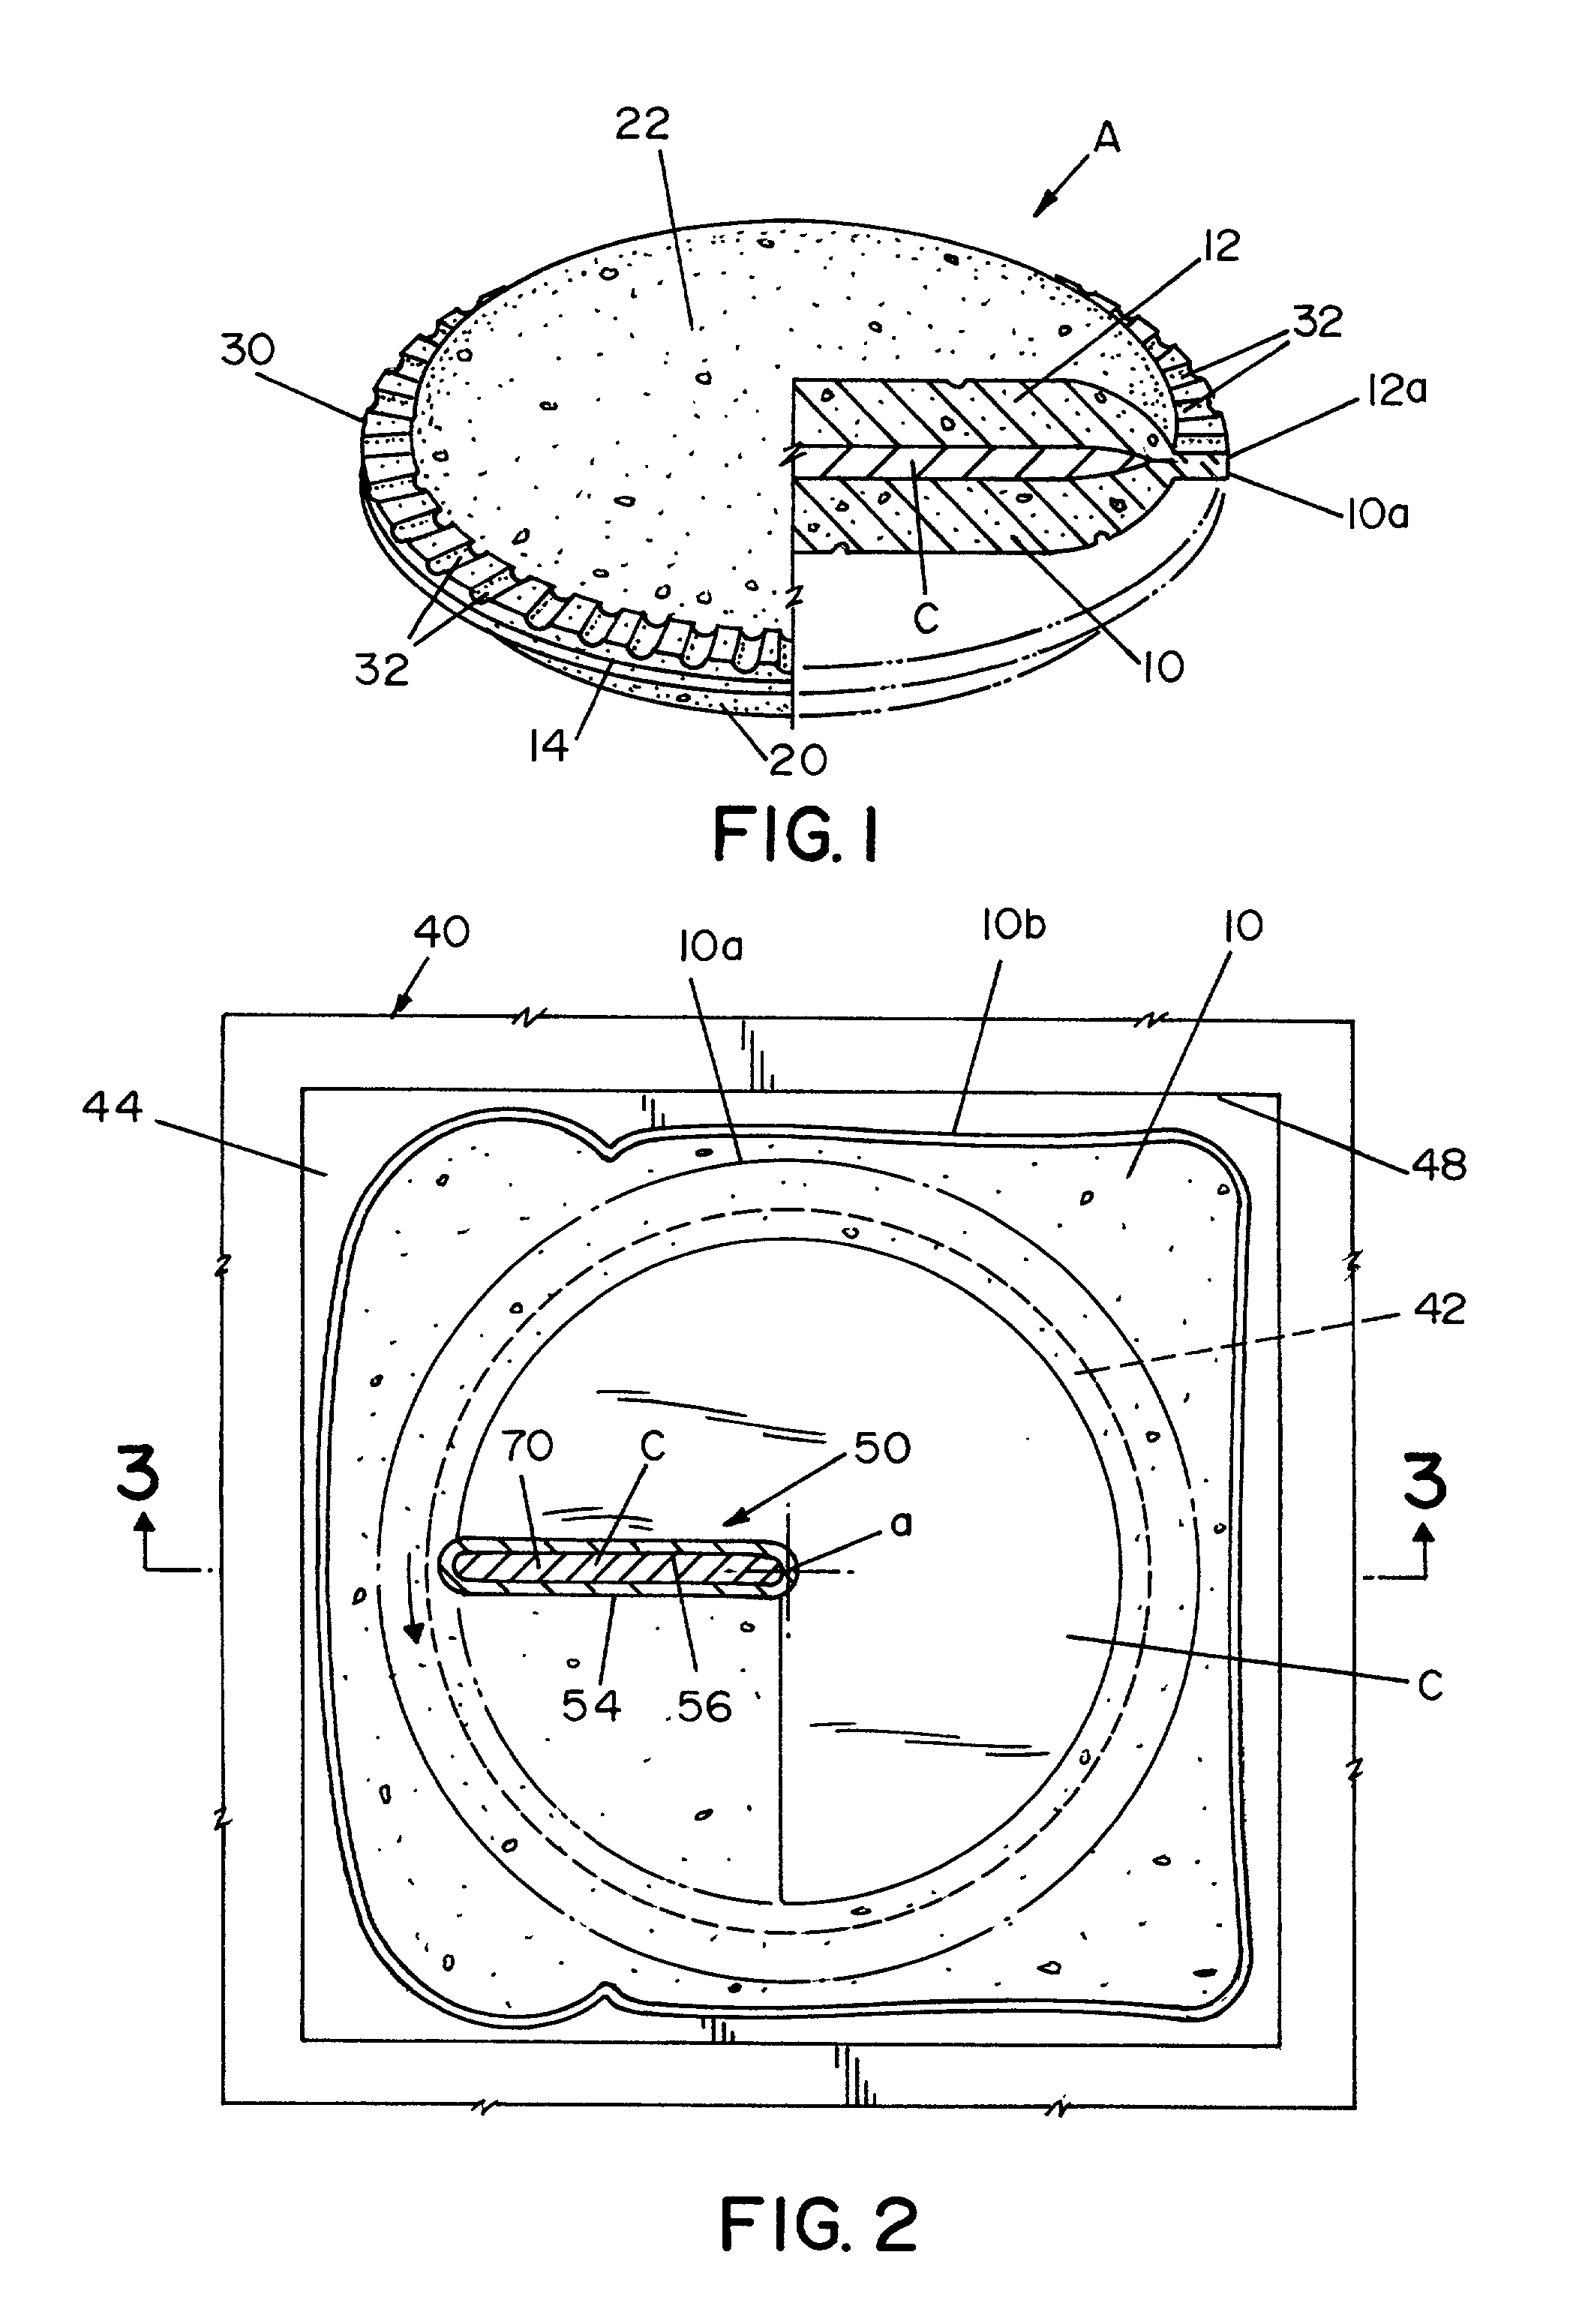 Frozen crustless sliced sandwich and method and apparatus for making same